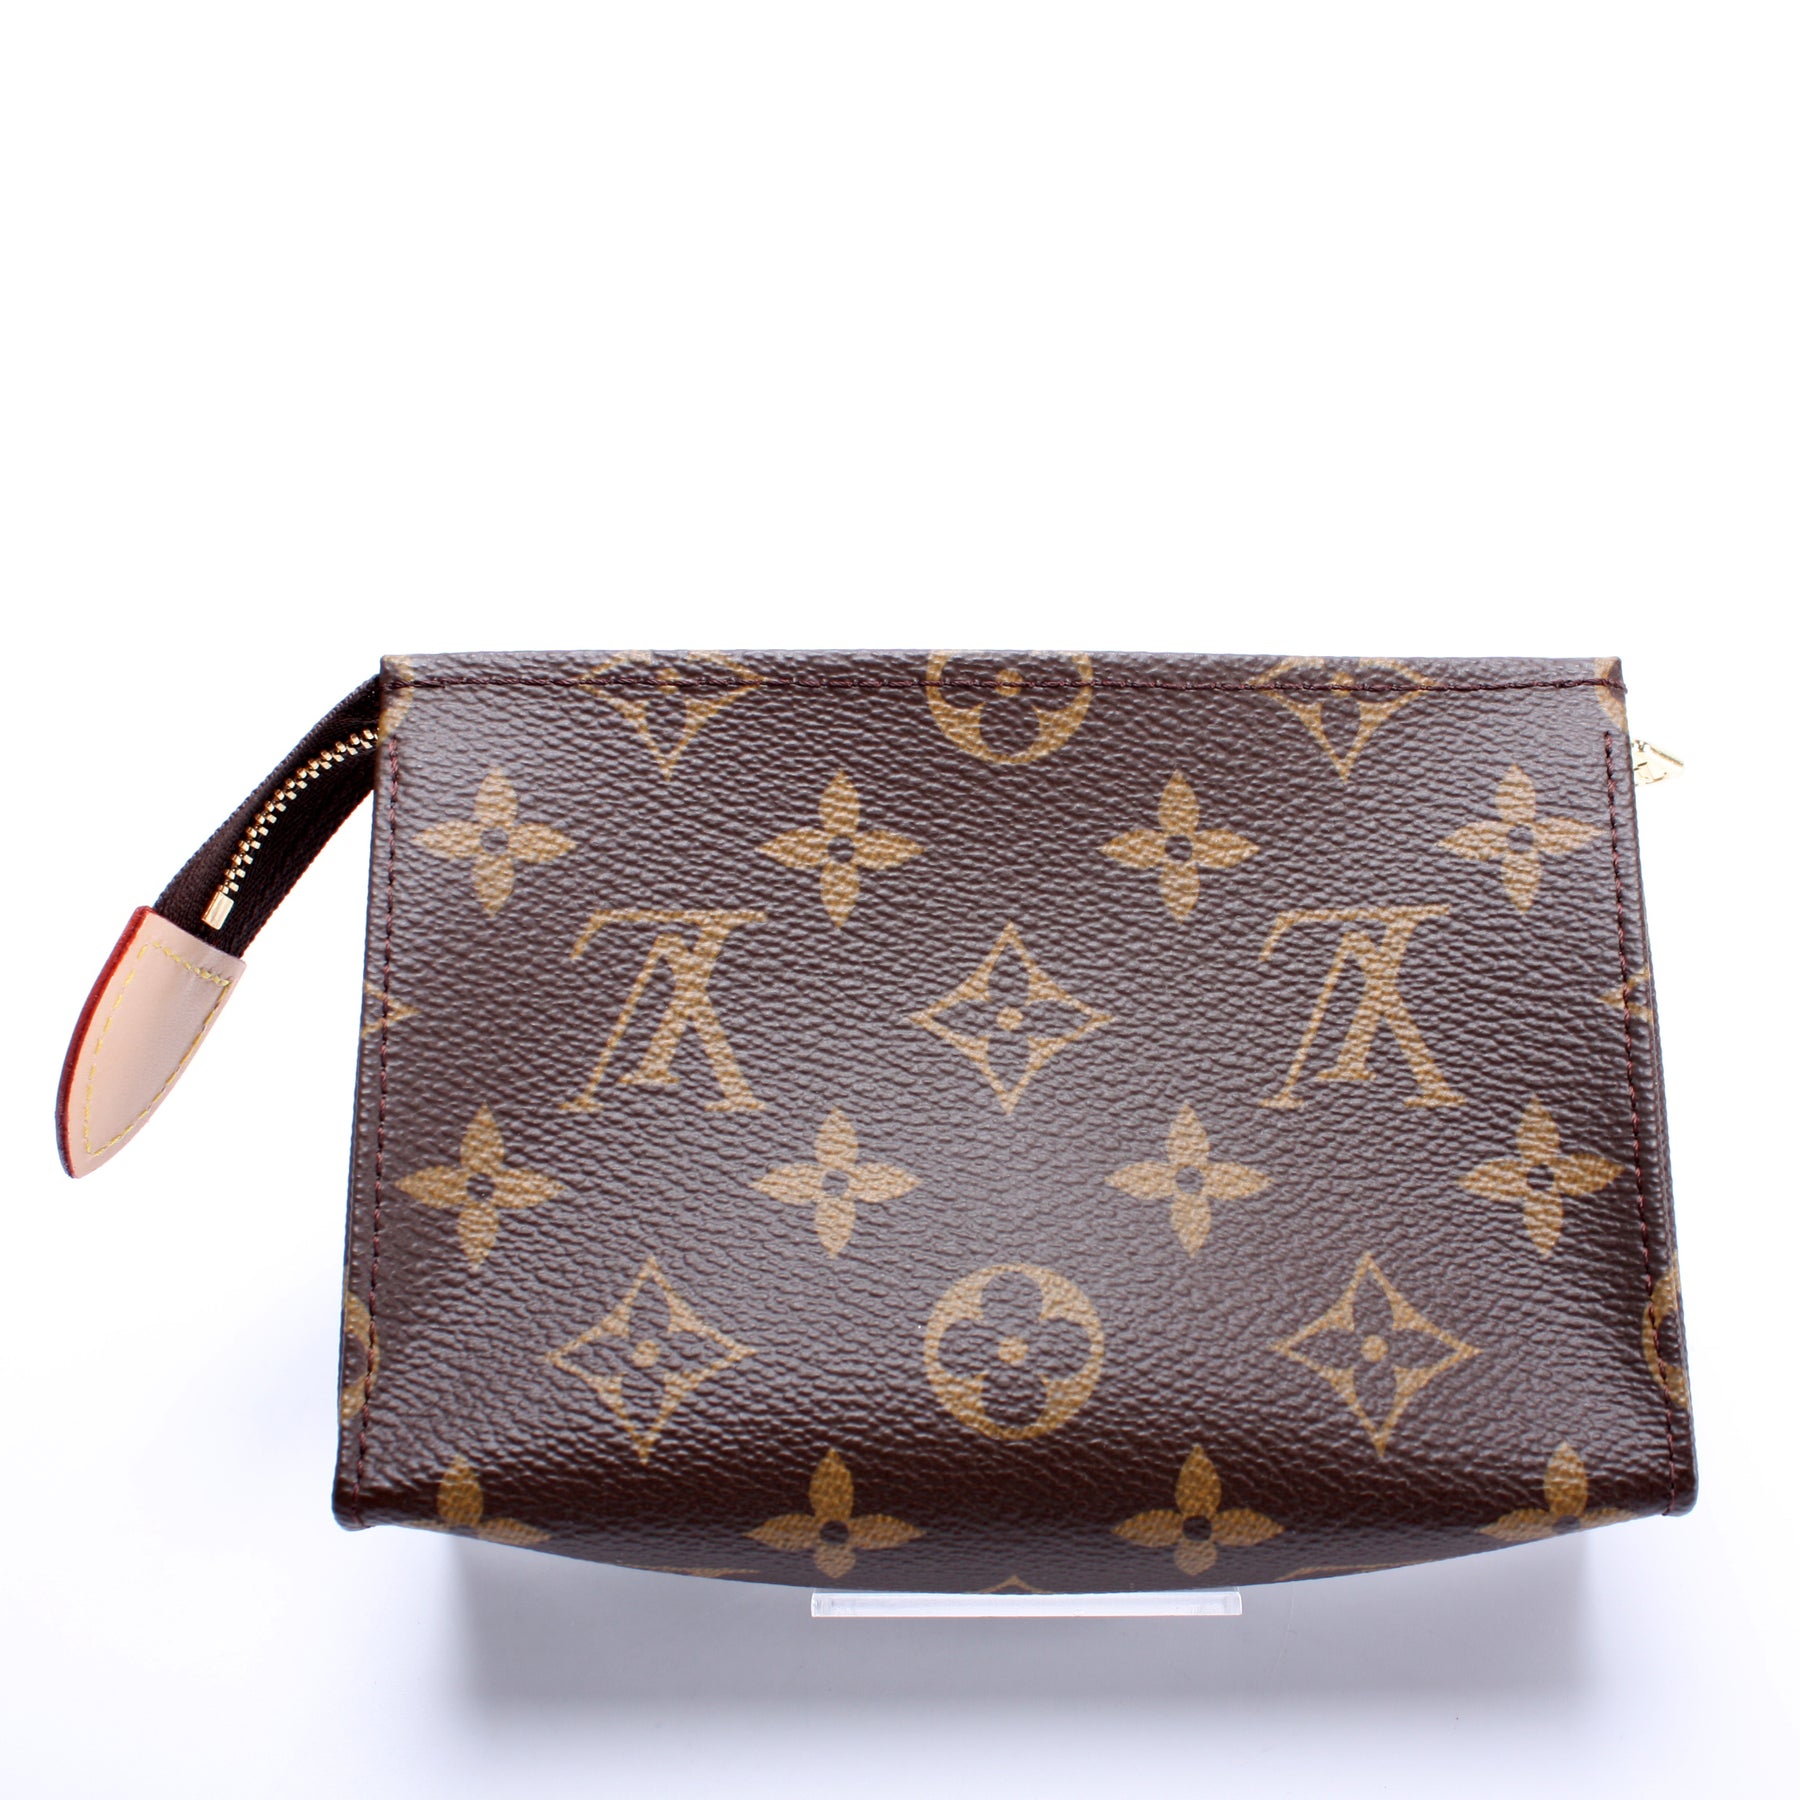 Louis Vuitton Toiletry 15 Review/Wear & Tear/What fits?? 